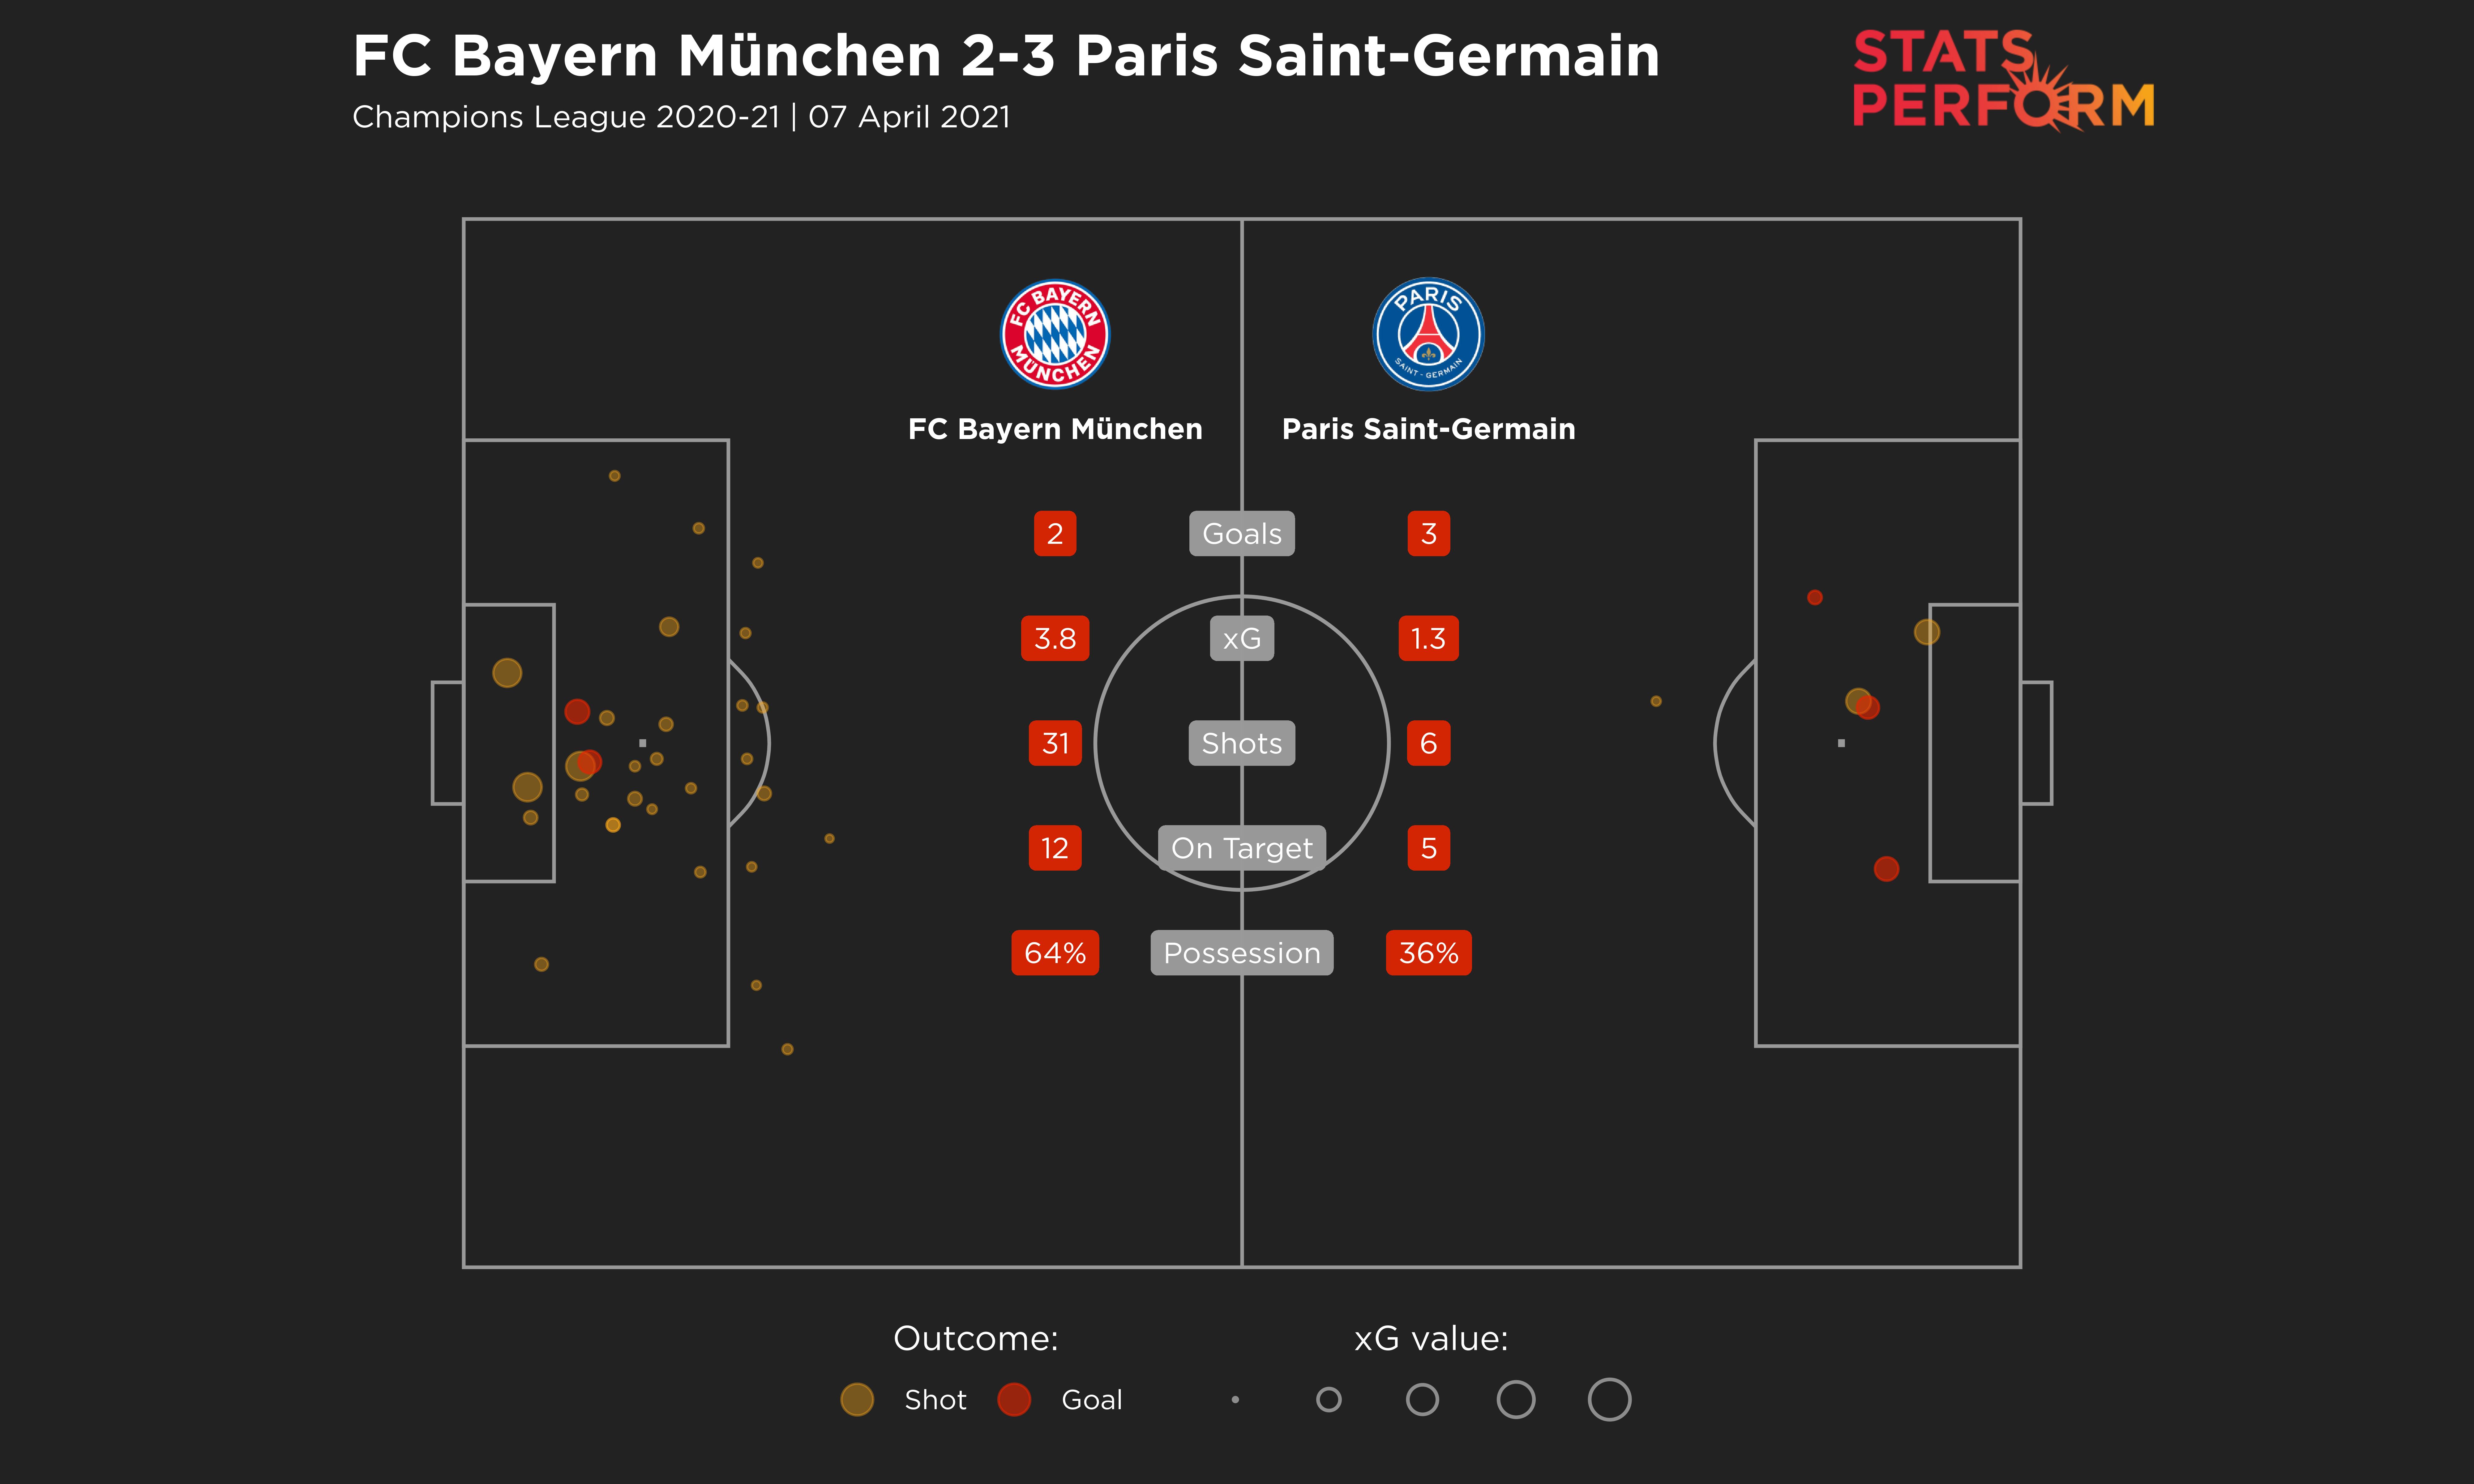 Bayern's home defeat to PSG